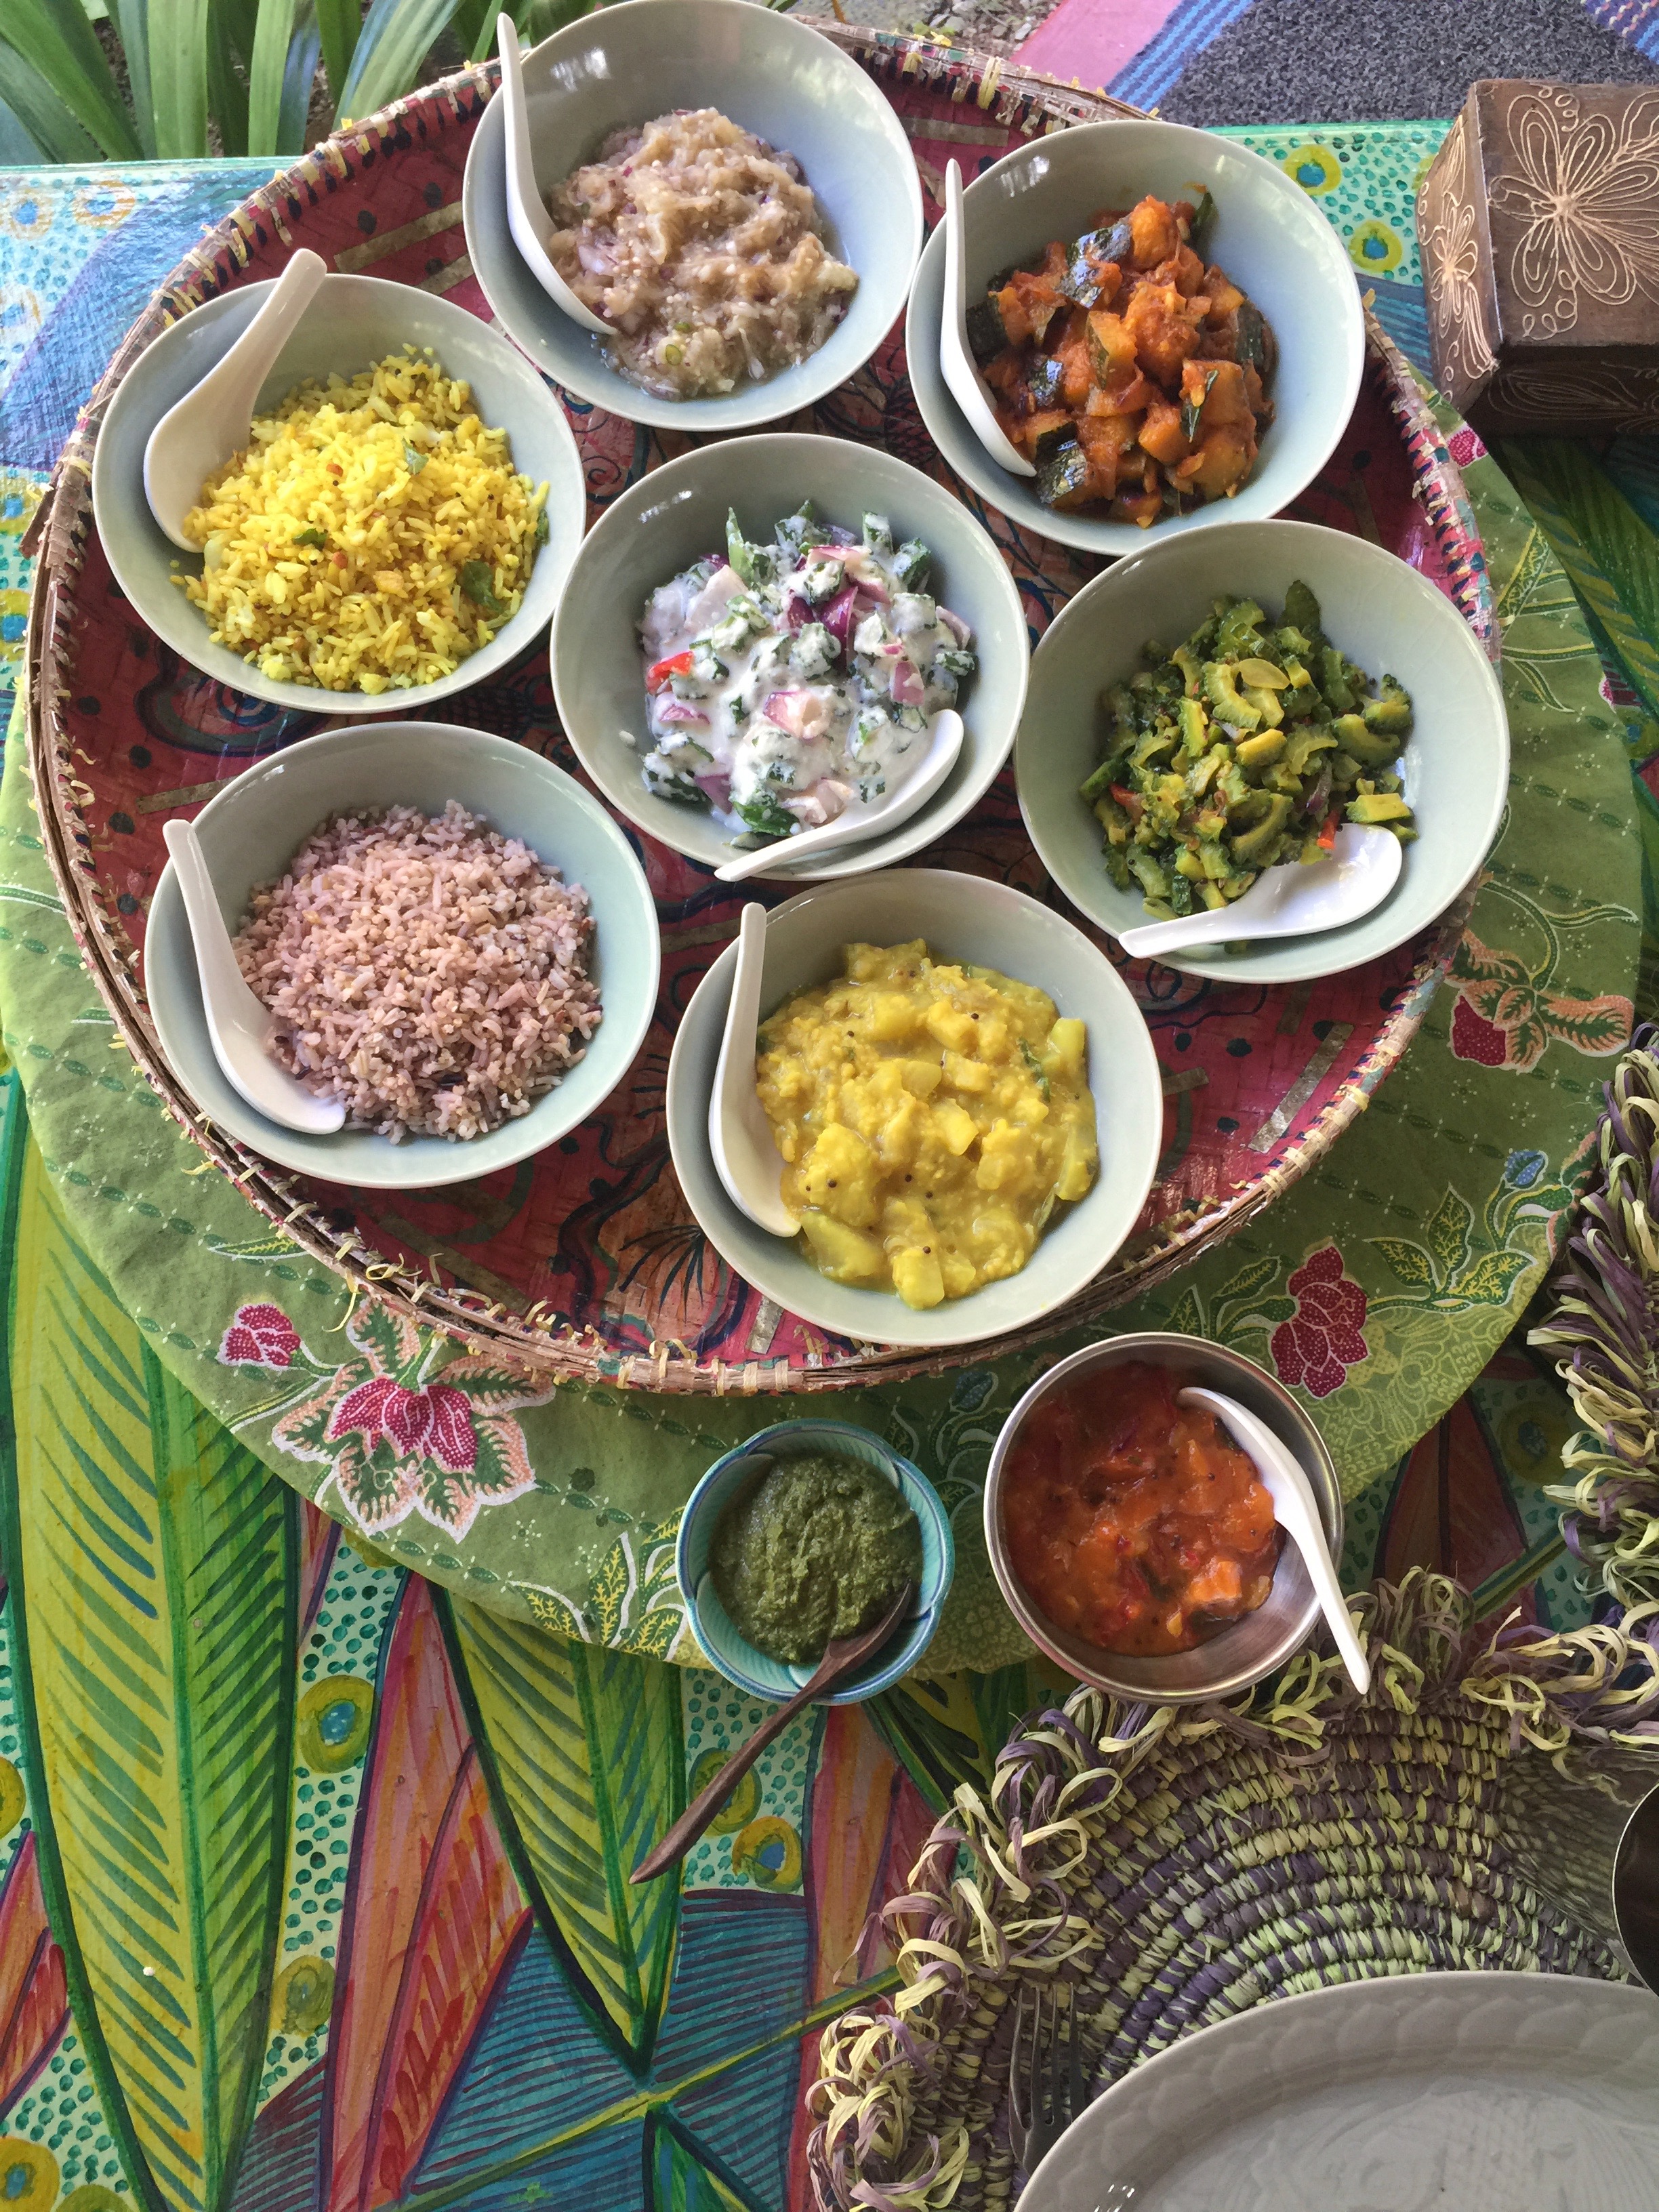 Ayurvedic dishes are an artful mix of flavors &amp; natural colour